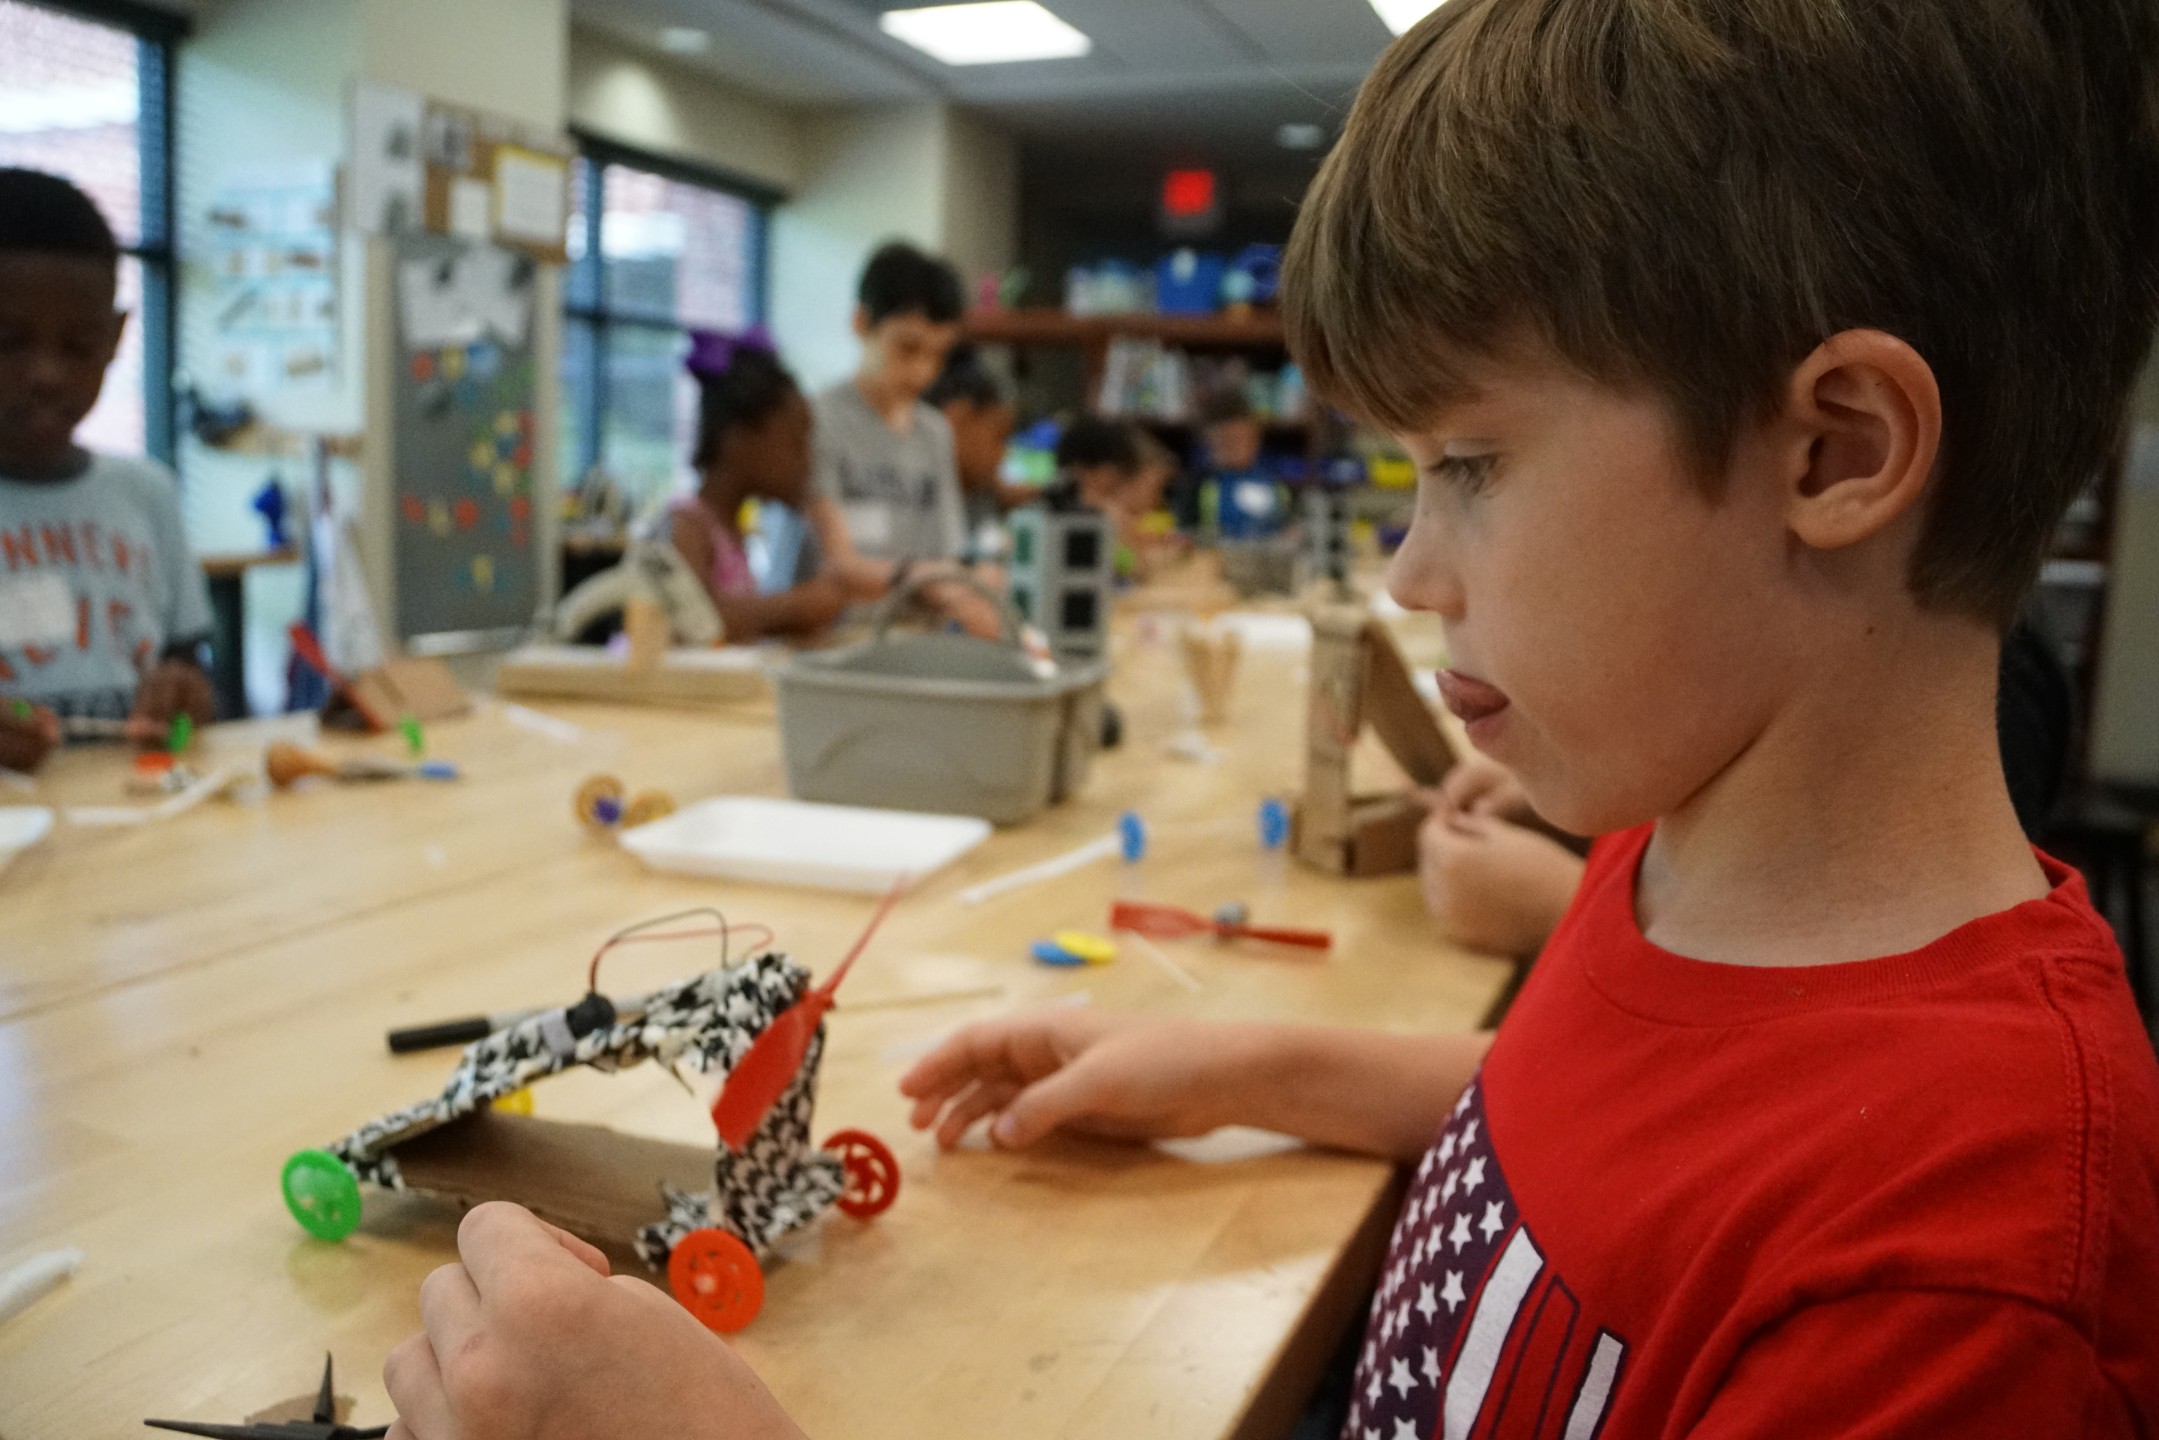 Boy in red shirt working in makerspace